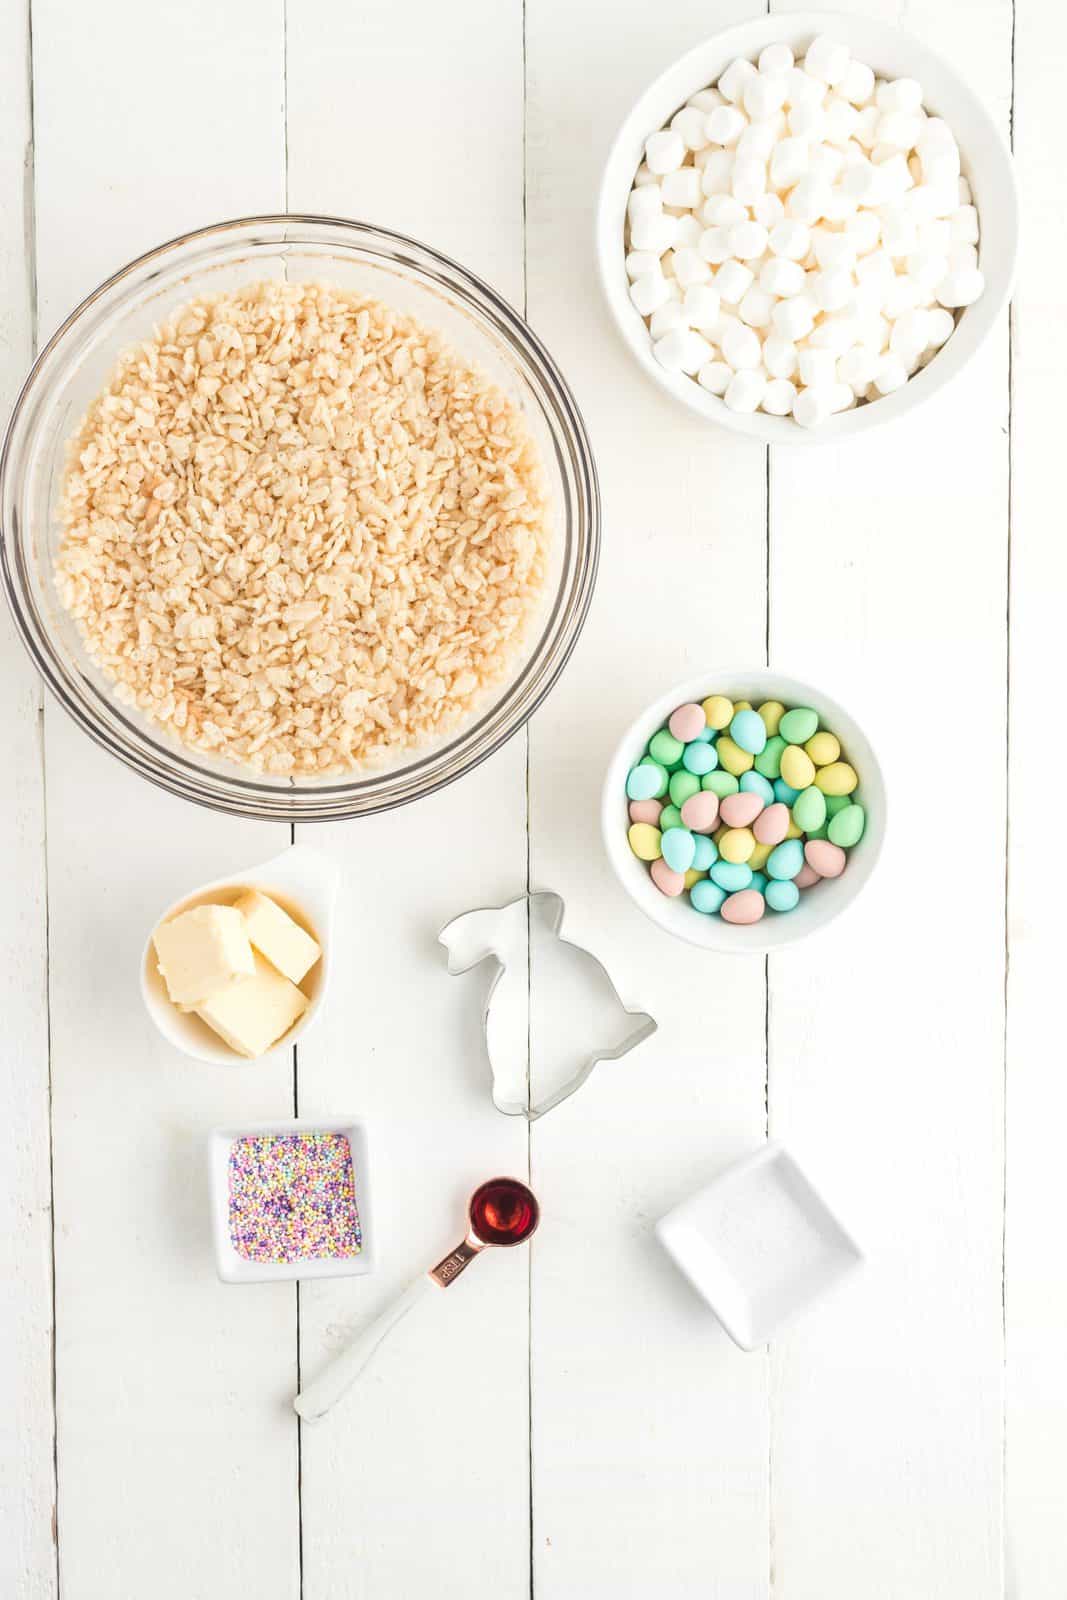 Ingredients needed: unsalted butter, mini marshmallows, salt, vanilla extract, Rice Krispies cereal, Cadbury mini eggs, white chocolate chips and pastel nonpareils.